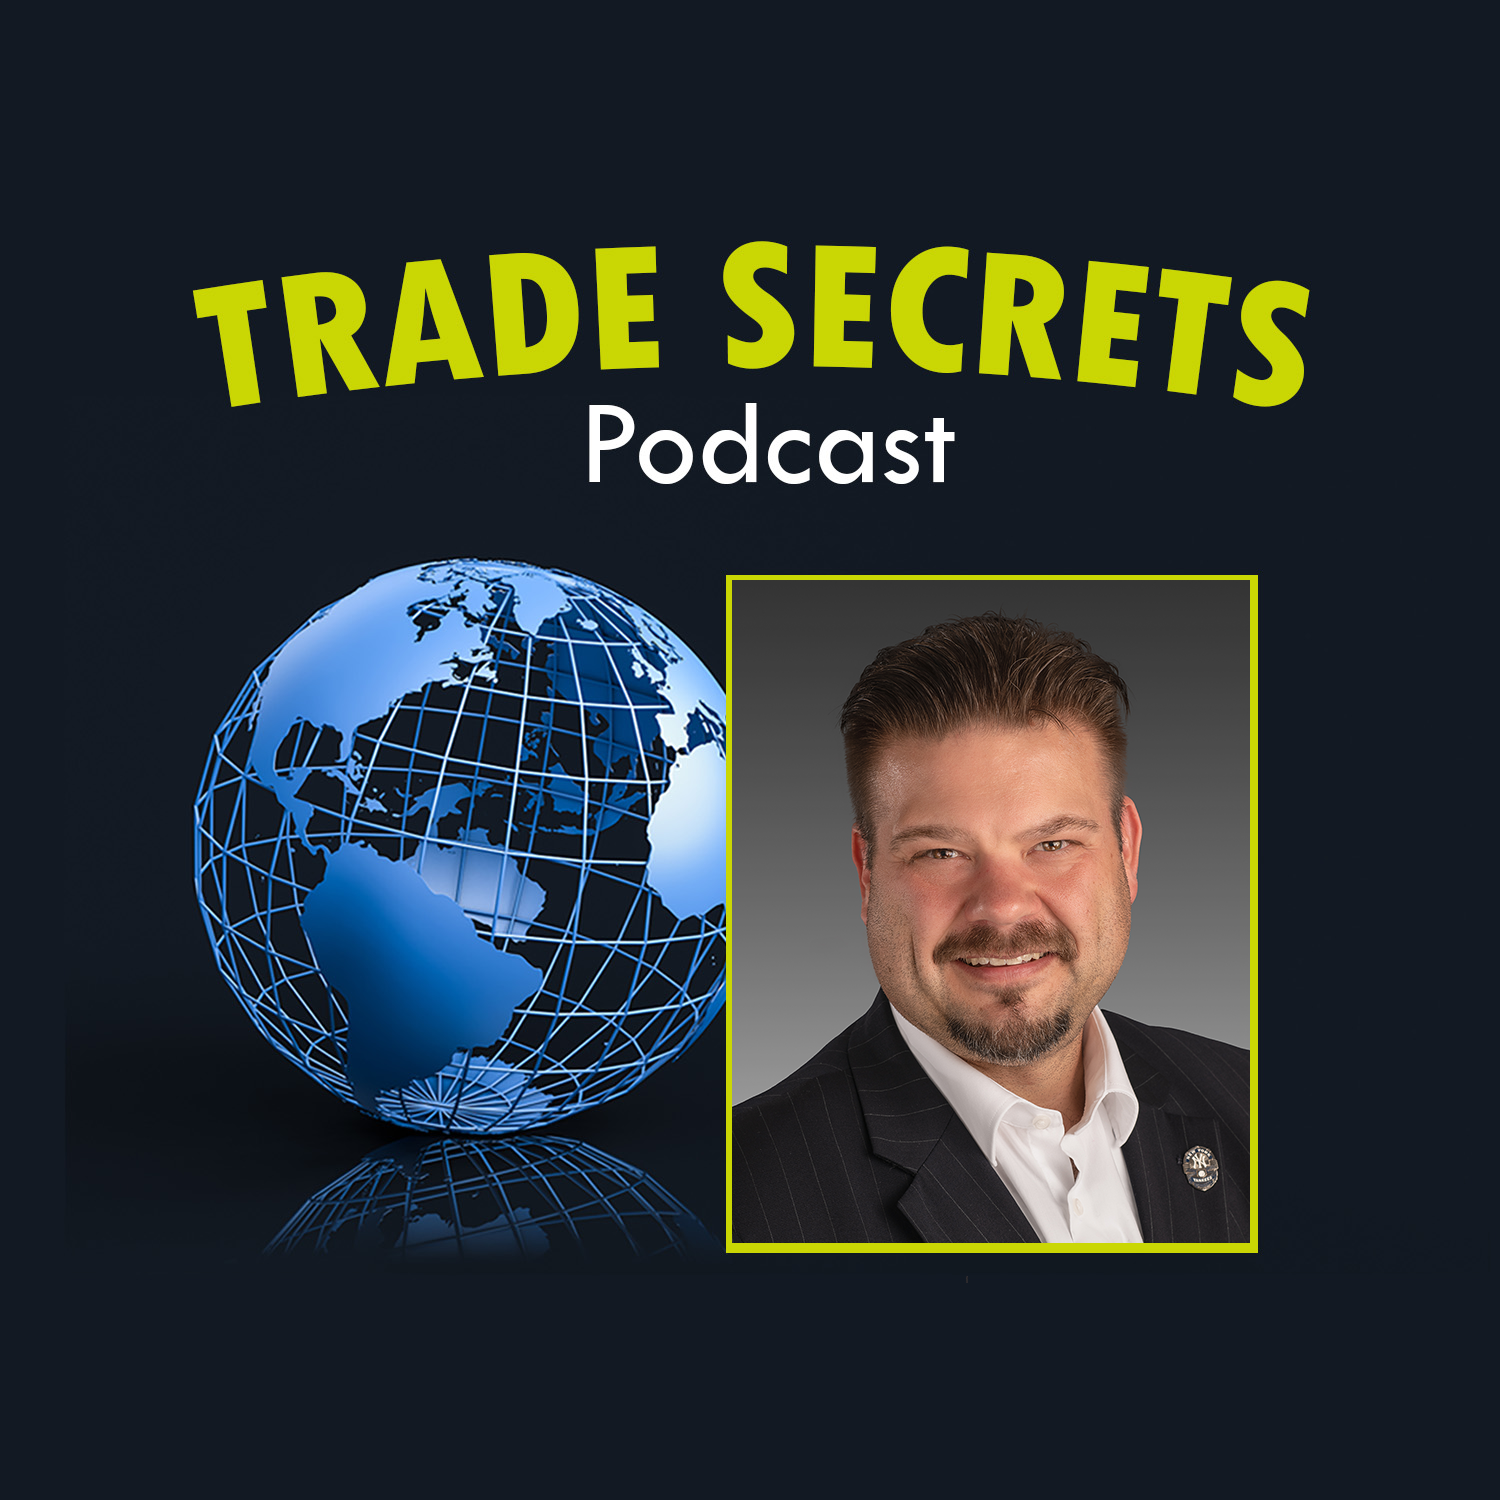 Trade Secrets Update - New Requirements for Importing Aluminum